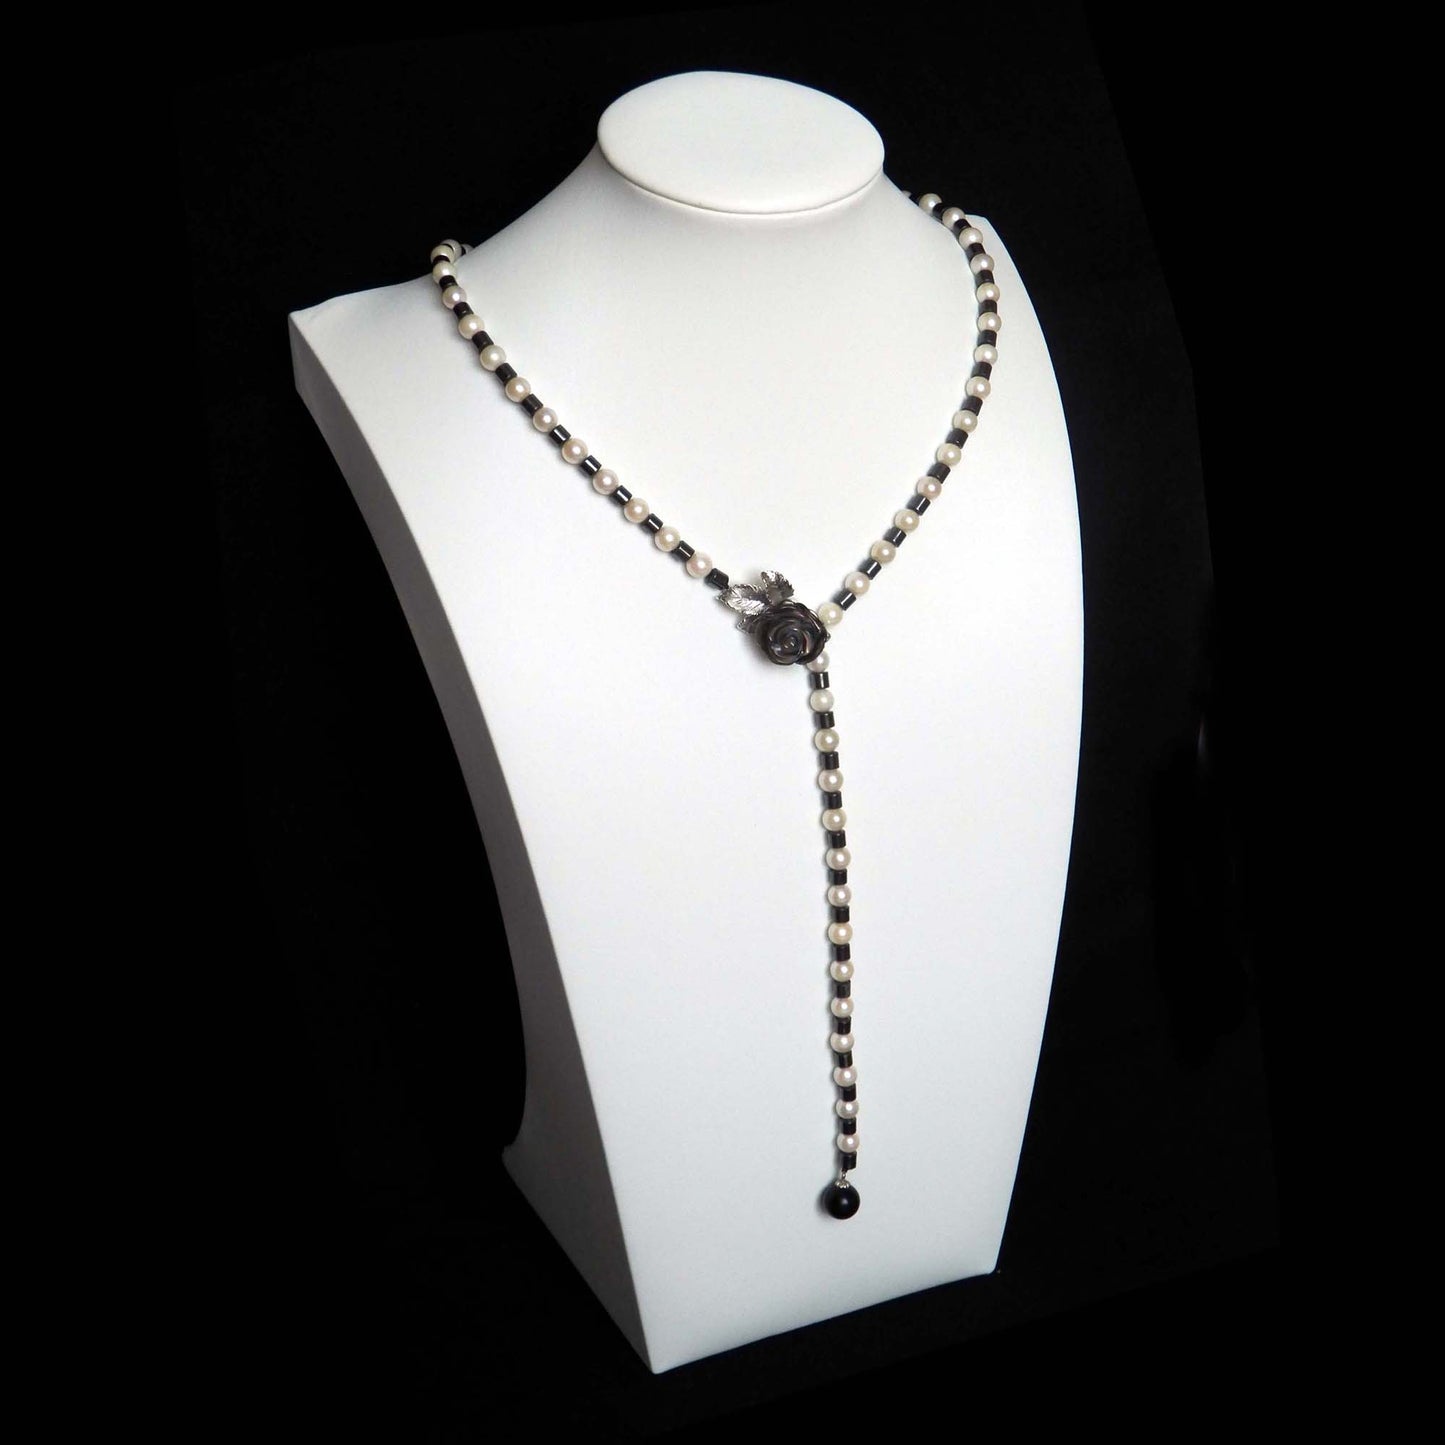 Long Akoya Pearl Y Necklace, Black Hematite Beads, Sterling Silver MOP Flower Pendant-Clasp